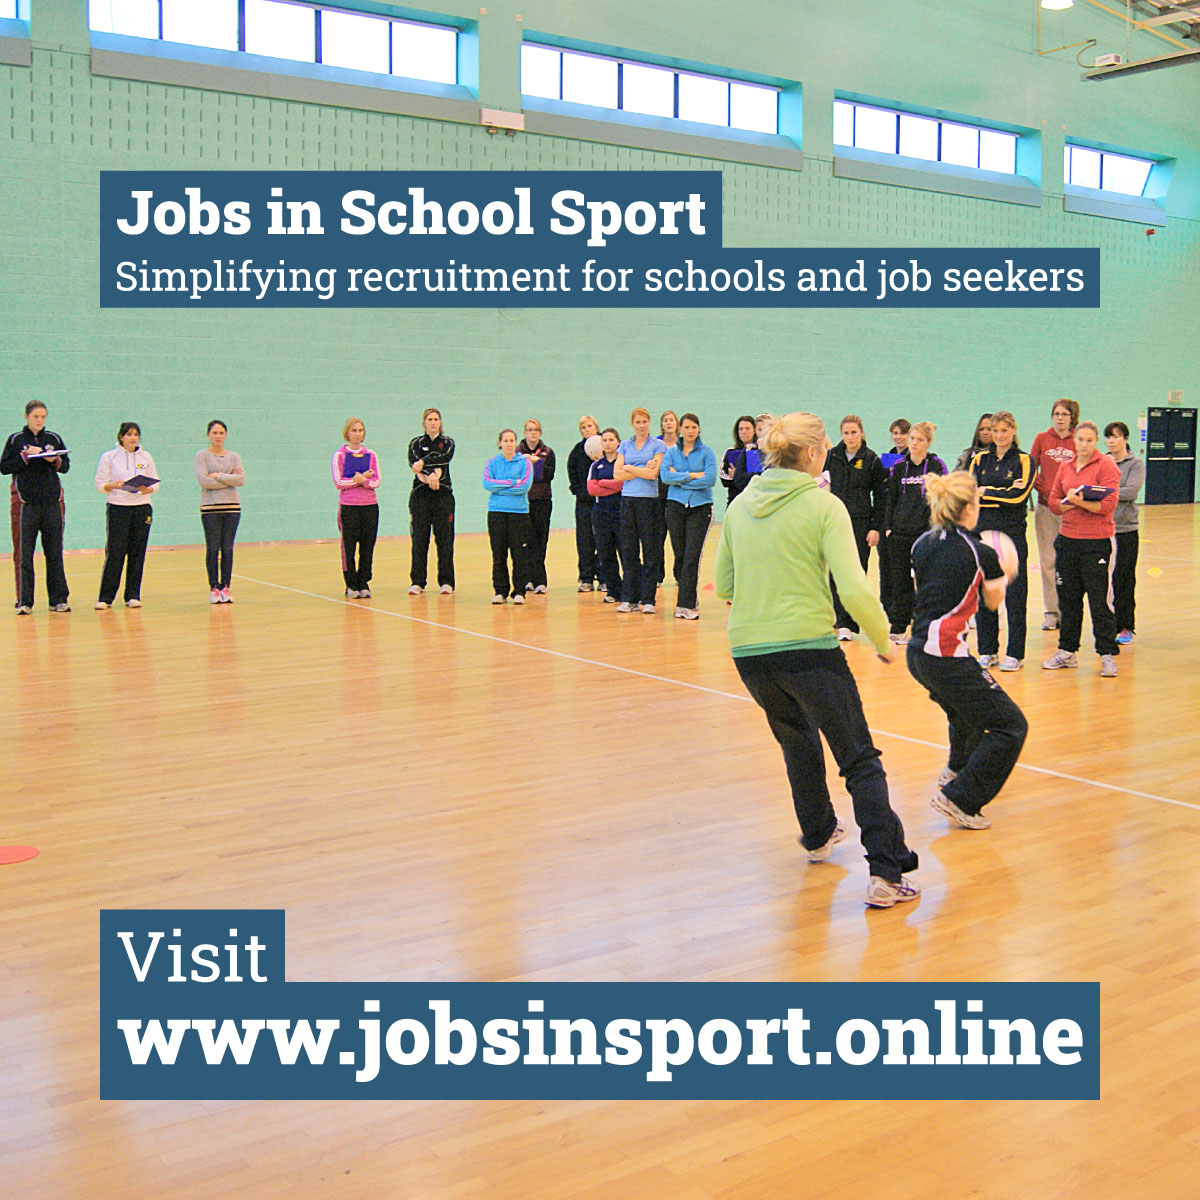 Check out our new Jobs in School Sport website at jobsinsport.online. Looking for a new job in school sport? Recruiting in school sport? Visit jobsinsport.online #jobs #recruitment #jobseekers #sports #jobsinsport #jobsinschoolsport #schoolsport #sportsrecruitment